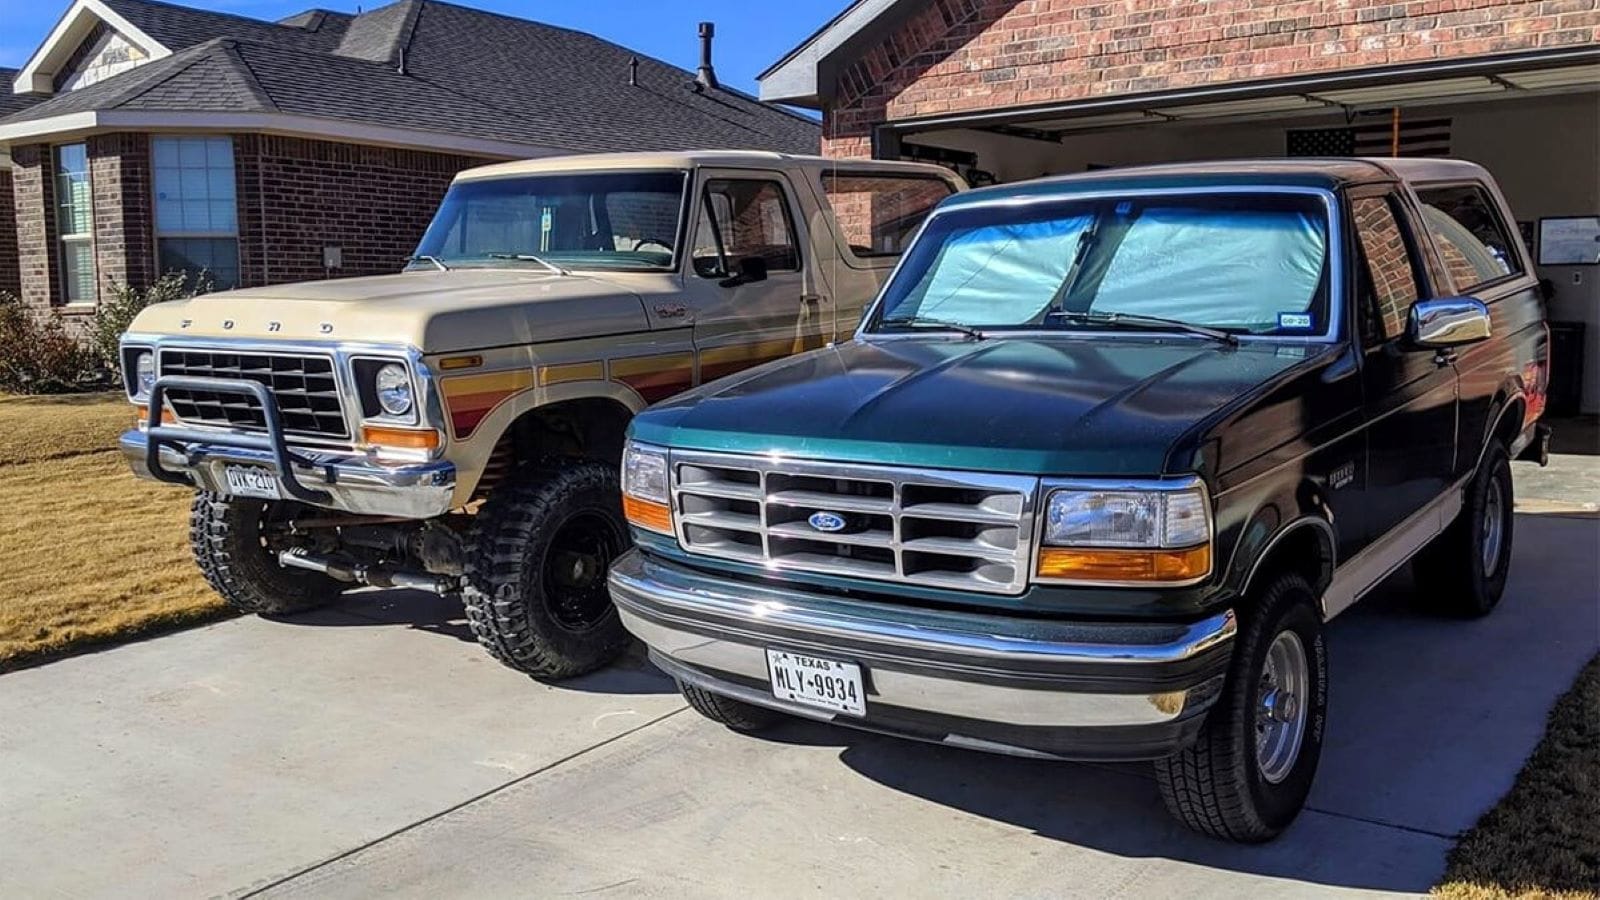 Retro Second Gen Bronco Looks Great With Select Mods Ford Trucks